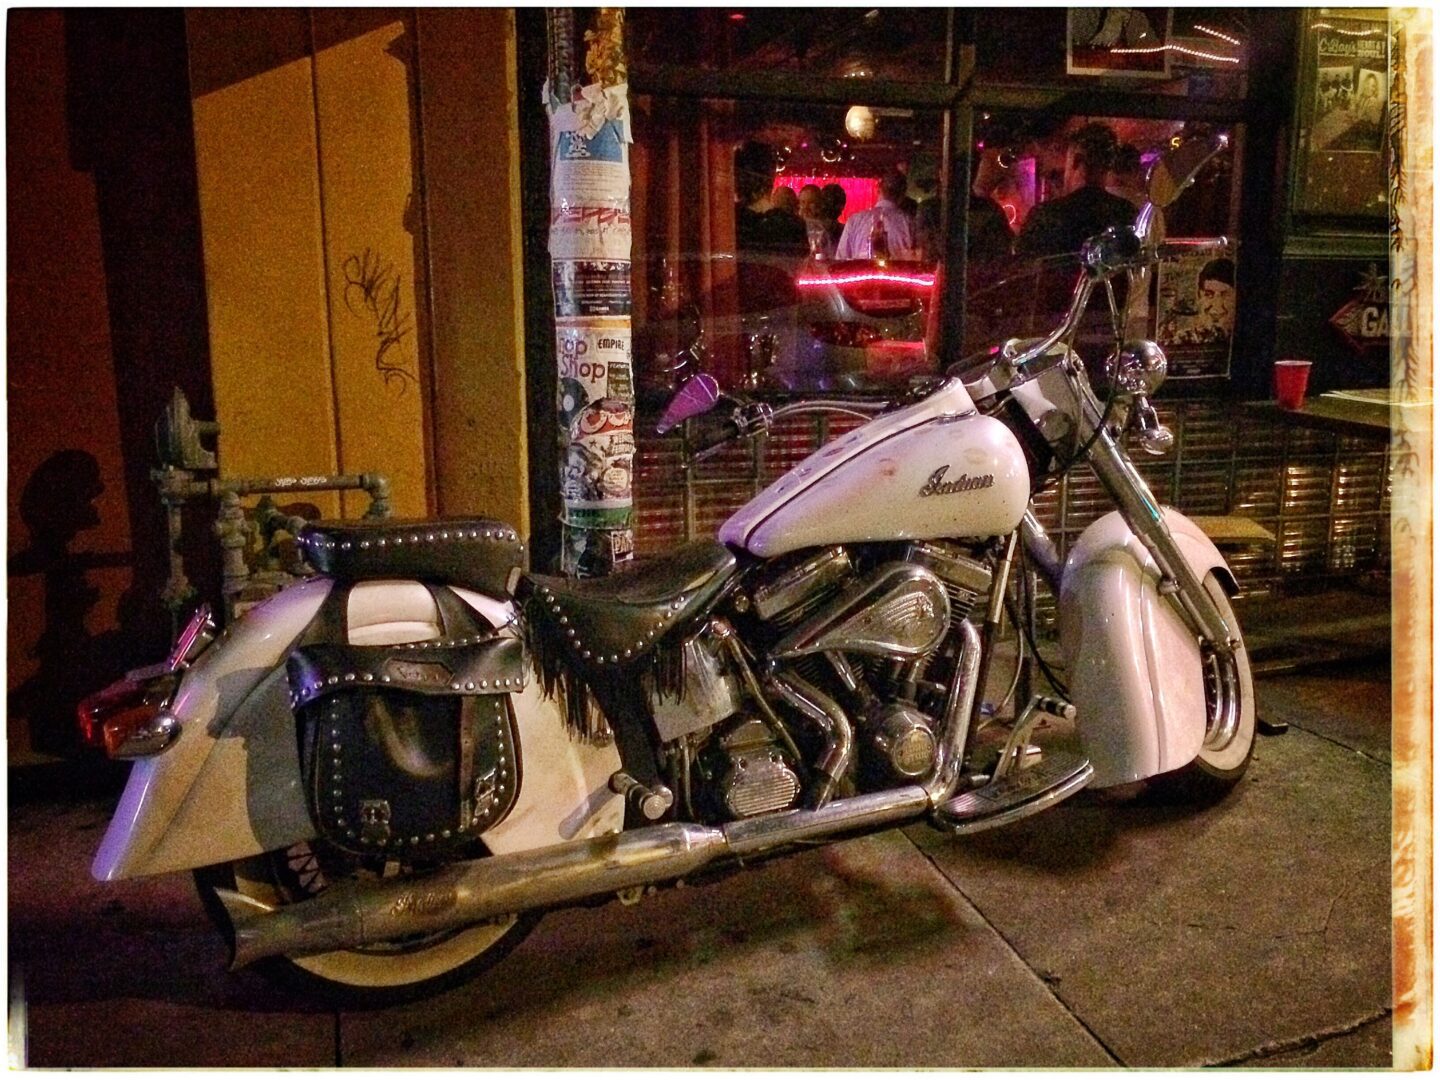 A white motorcycle parked in front of a bar.